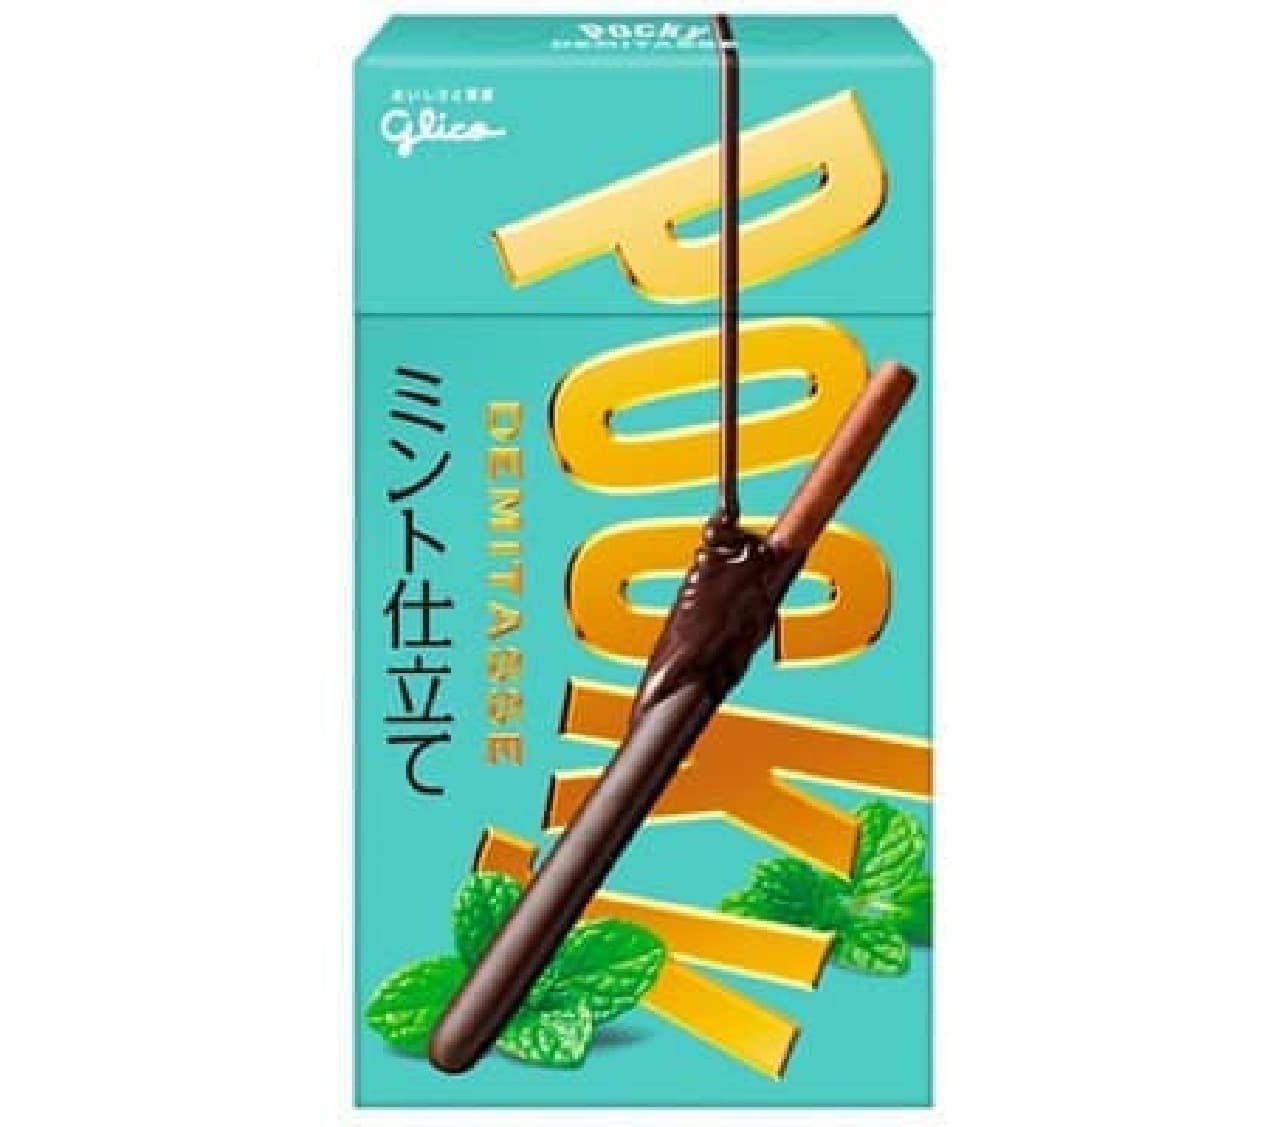 Introducing mint flavor to short Pocky